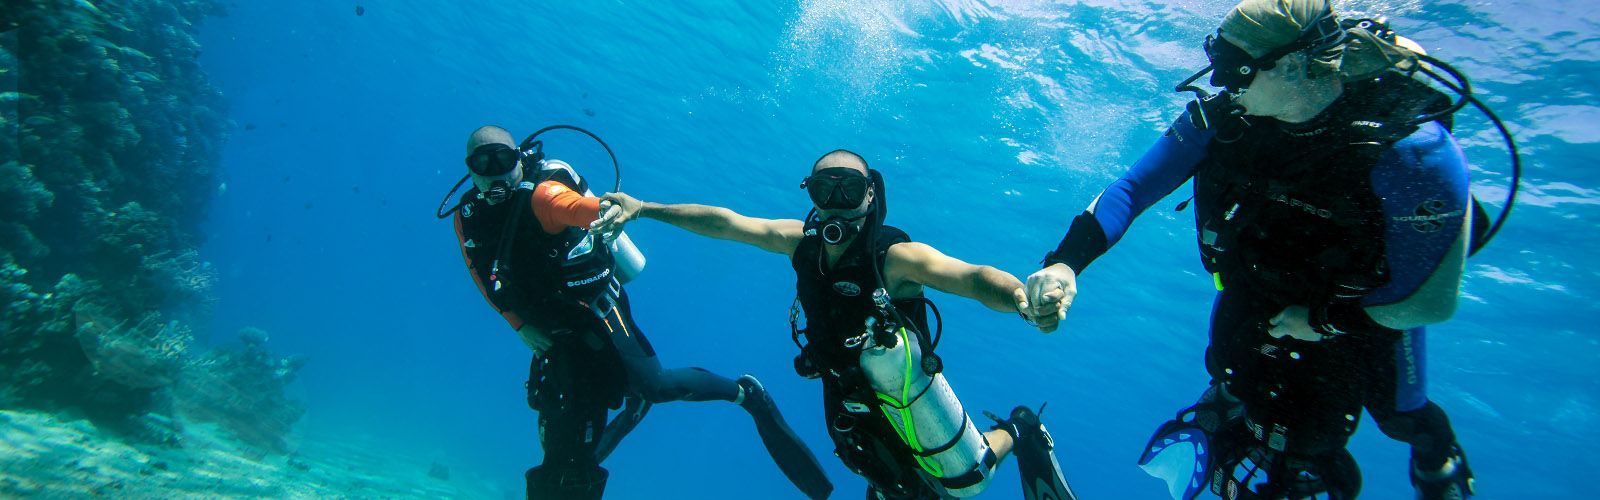 Scuba Diving in Marsa Alam with Scuba World Divers's Courses